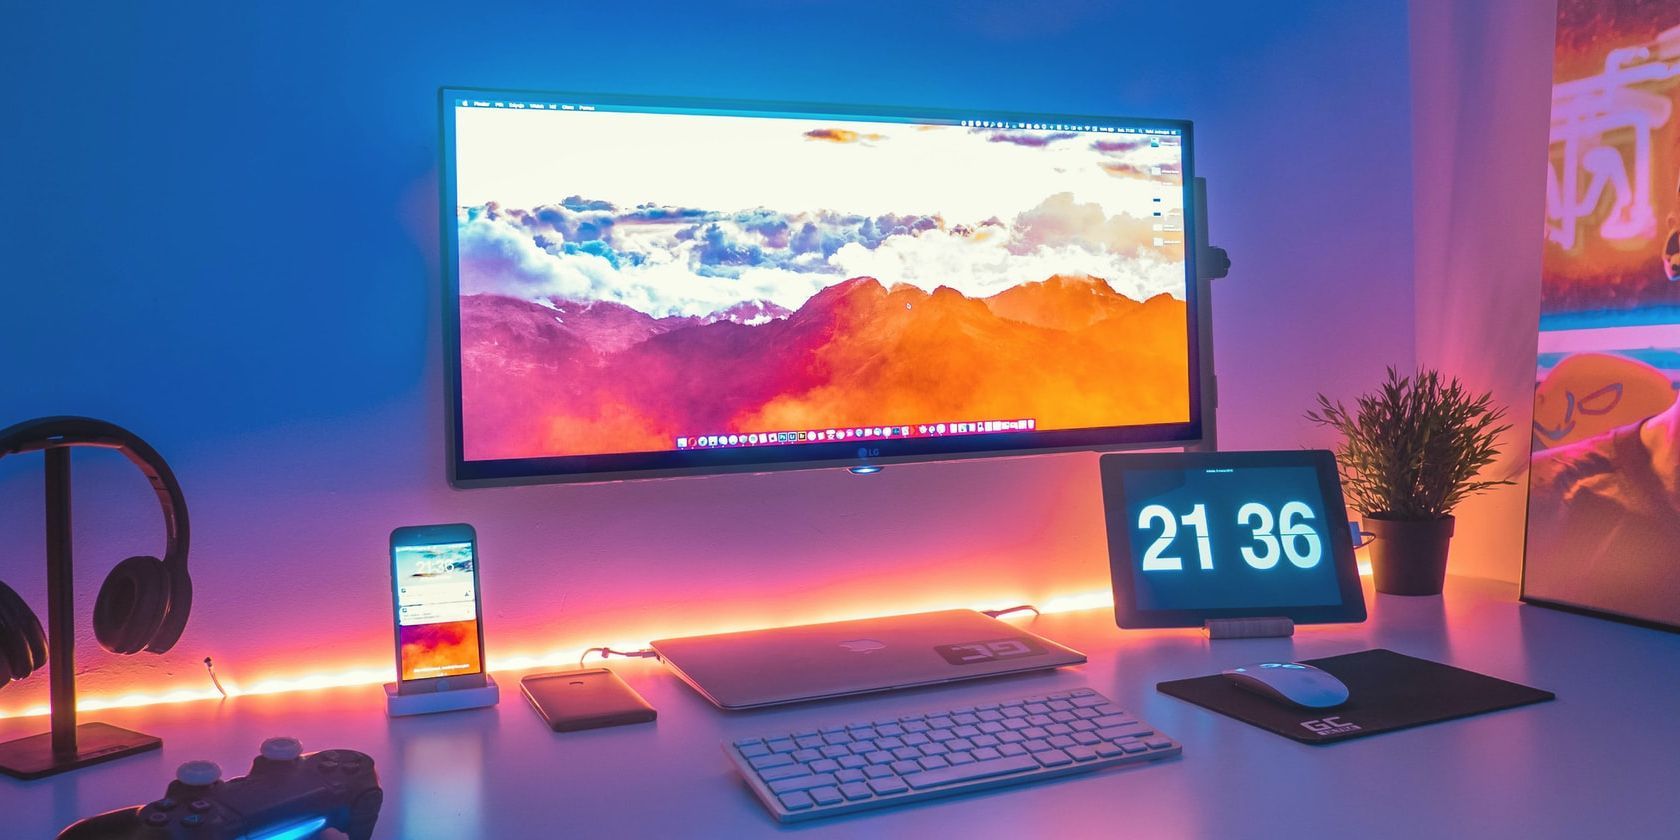 Wall mounted monitor with clouds and mountains desktop background above a desk holding multiple devices. Mood lighting resembles a sunset.